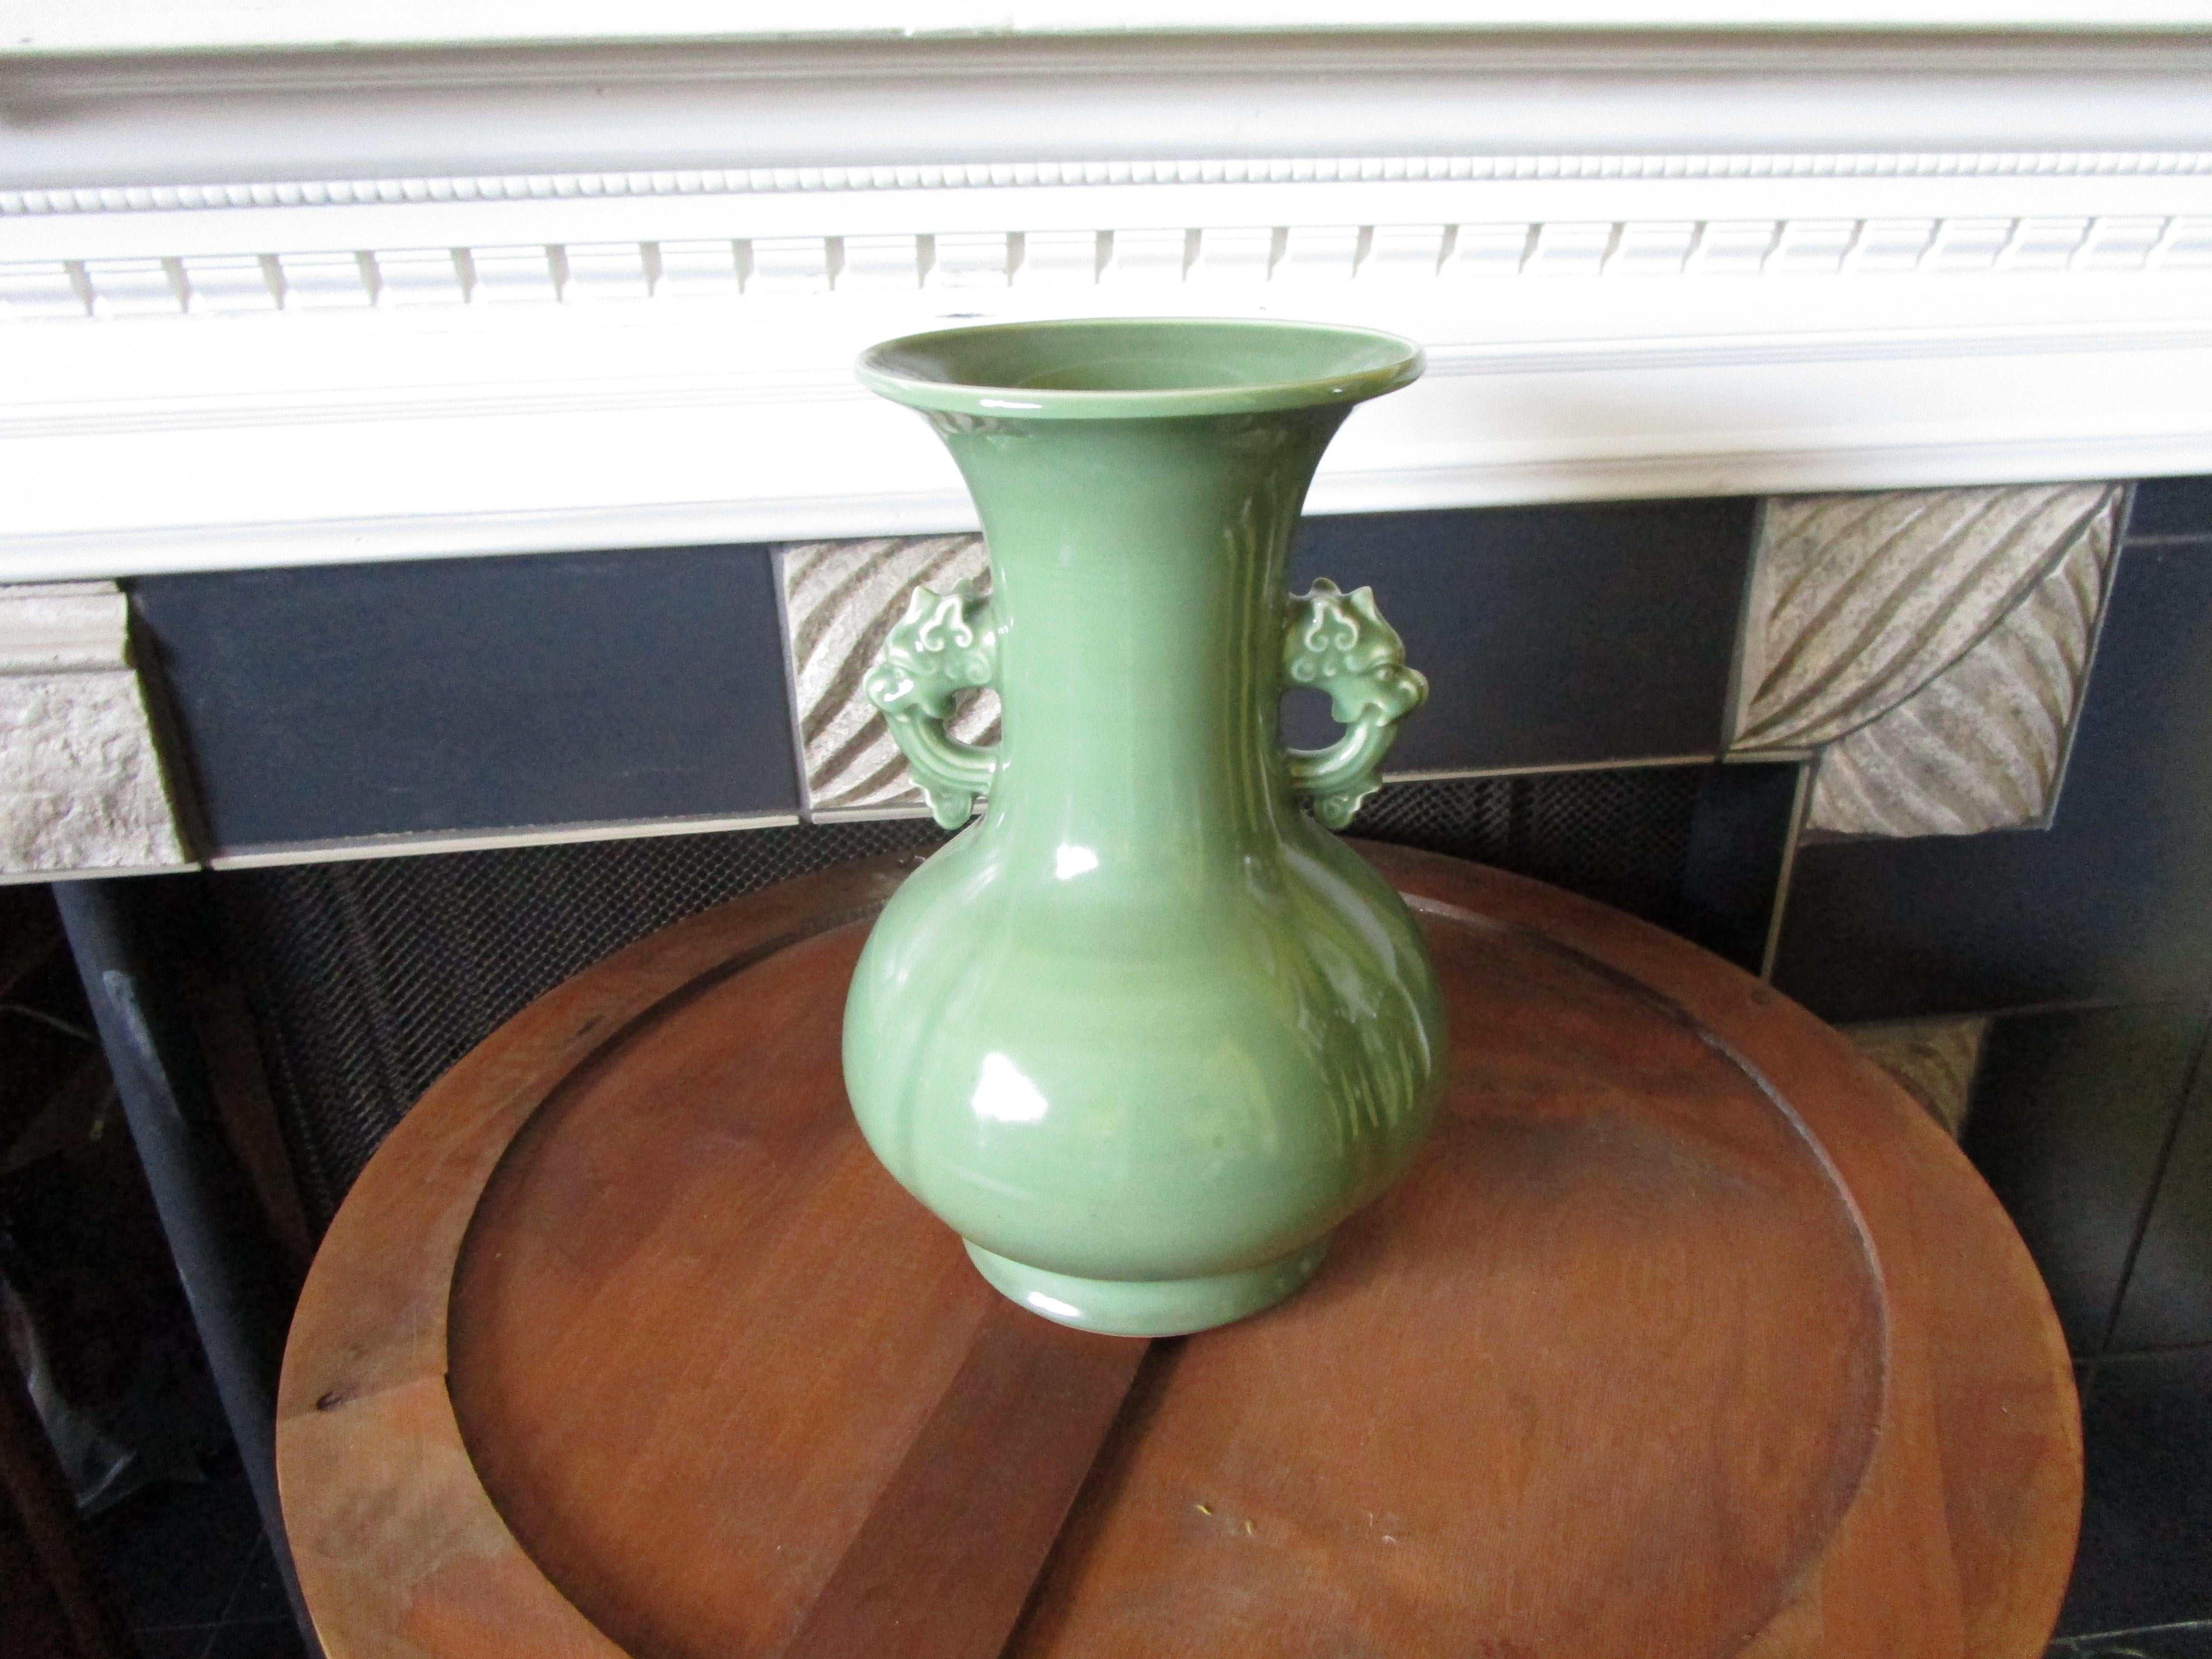 This is an extraordinary jade green celadon Korean vase from the mid 20th century. The vase is baluster shape with an elongated, elegant neck.  It is in excellent condition without chips or cracks. There is a deep fluting on the body of the vase